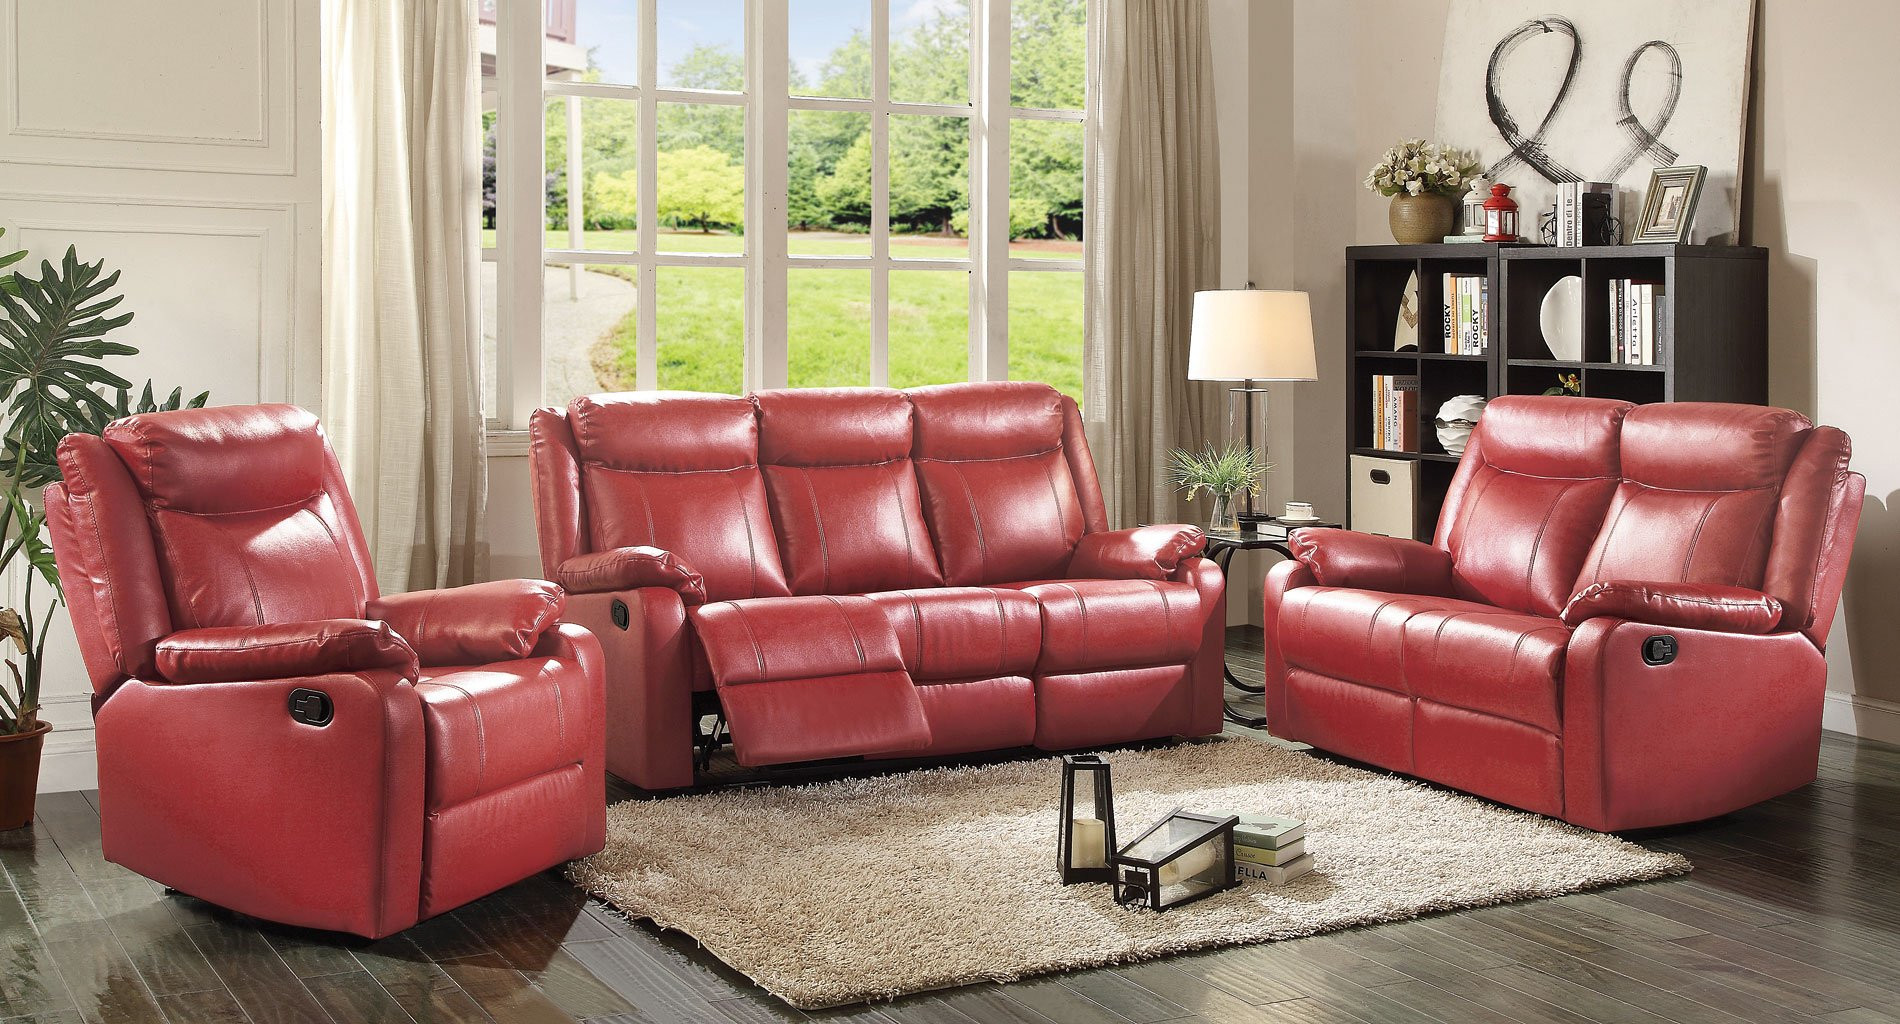 Red Living Room Chairs
 G765 Reclining Living Room Set Red by Glory Furniture